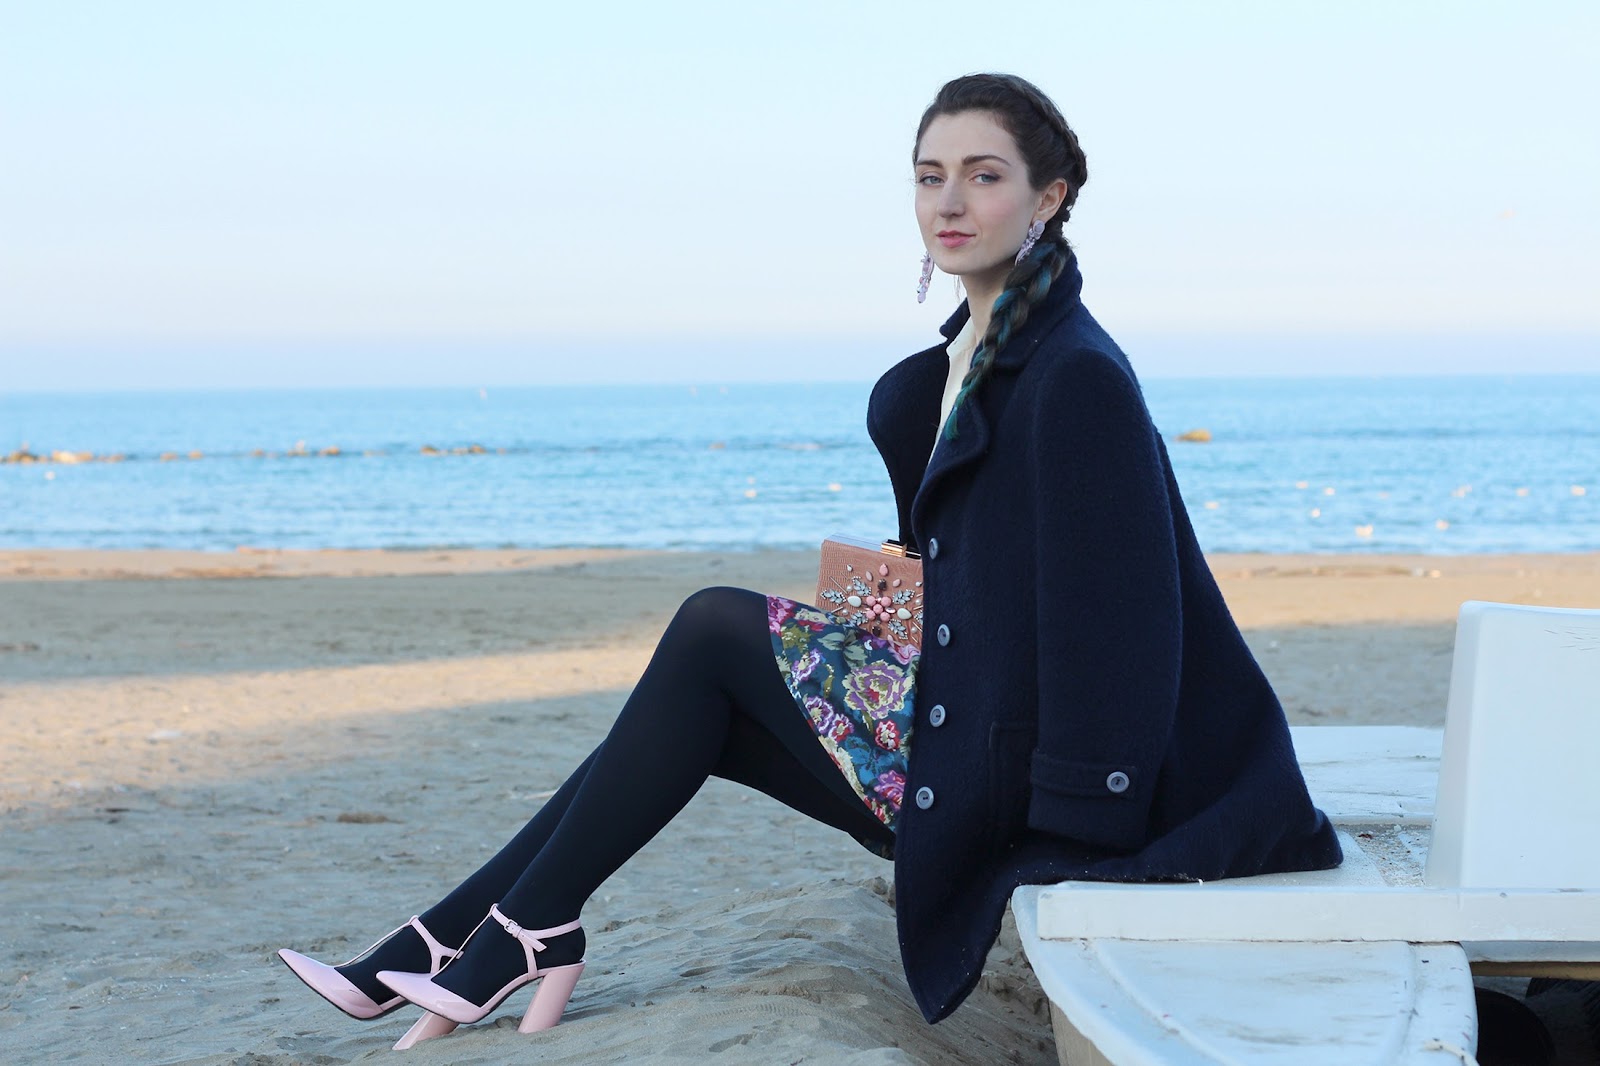 fashion style blogger italian girl italy vogue glamour flowers skirt new look bag pink shoes heels bar zara scarpe rosa vintage hairstyle colored hai hairstyle blue axels laboratory soutache earrings pescara